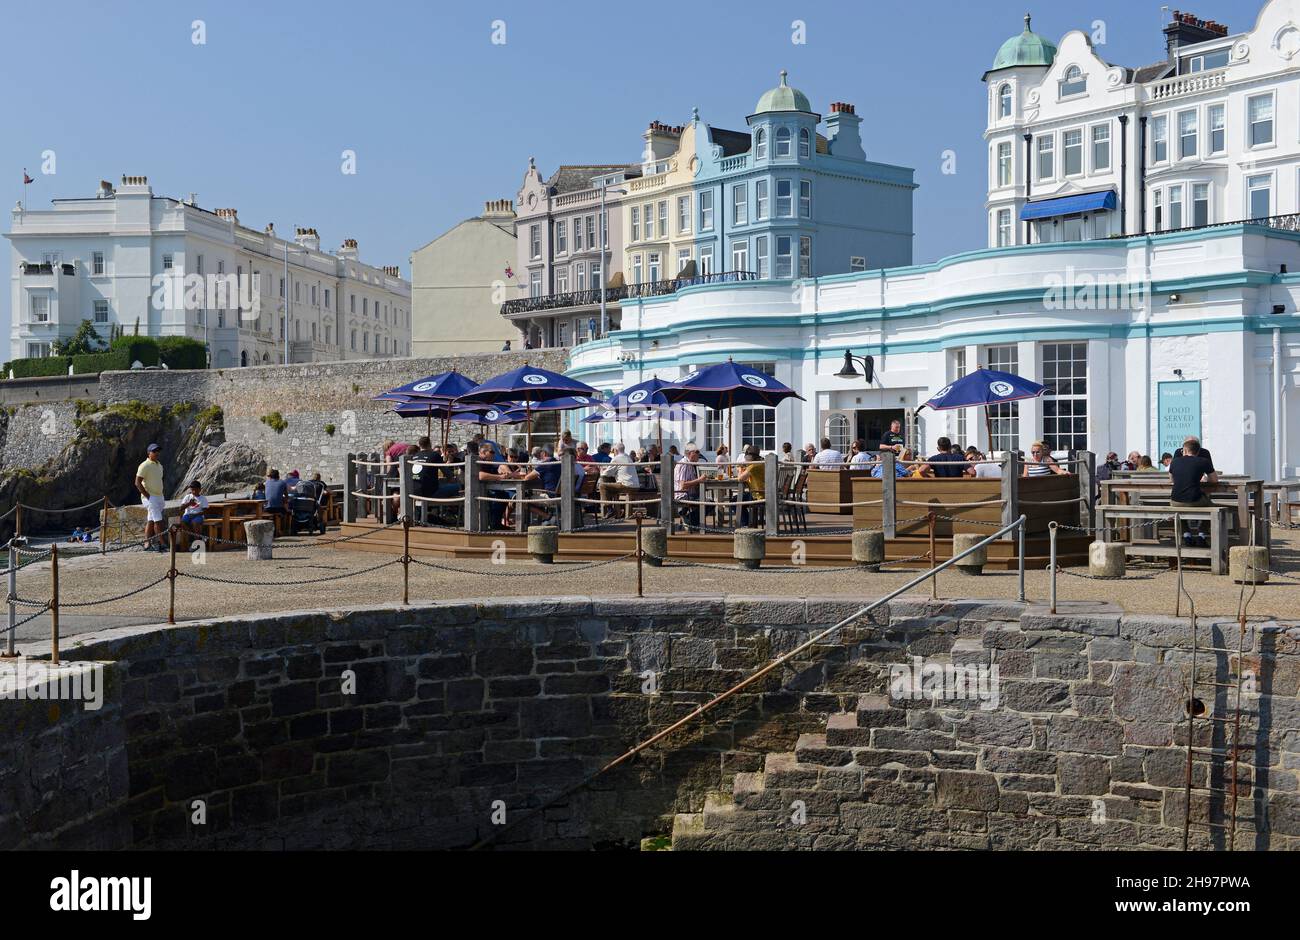 A restaurant on West Hoe Pier with many busy tables outside. Plymouth, Devon, UK Stock Photo